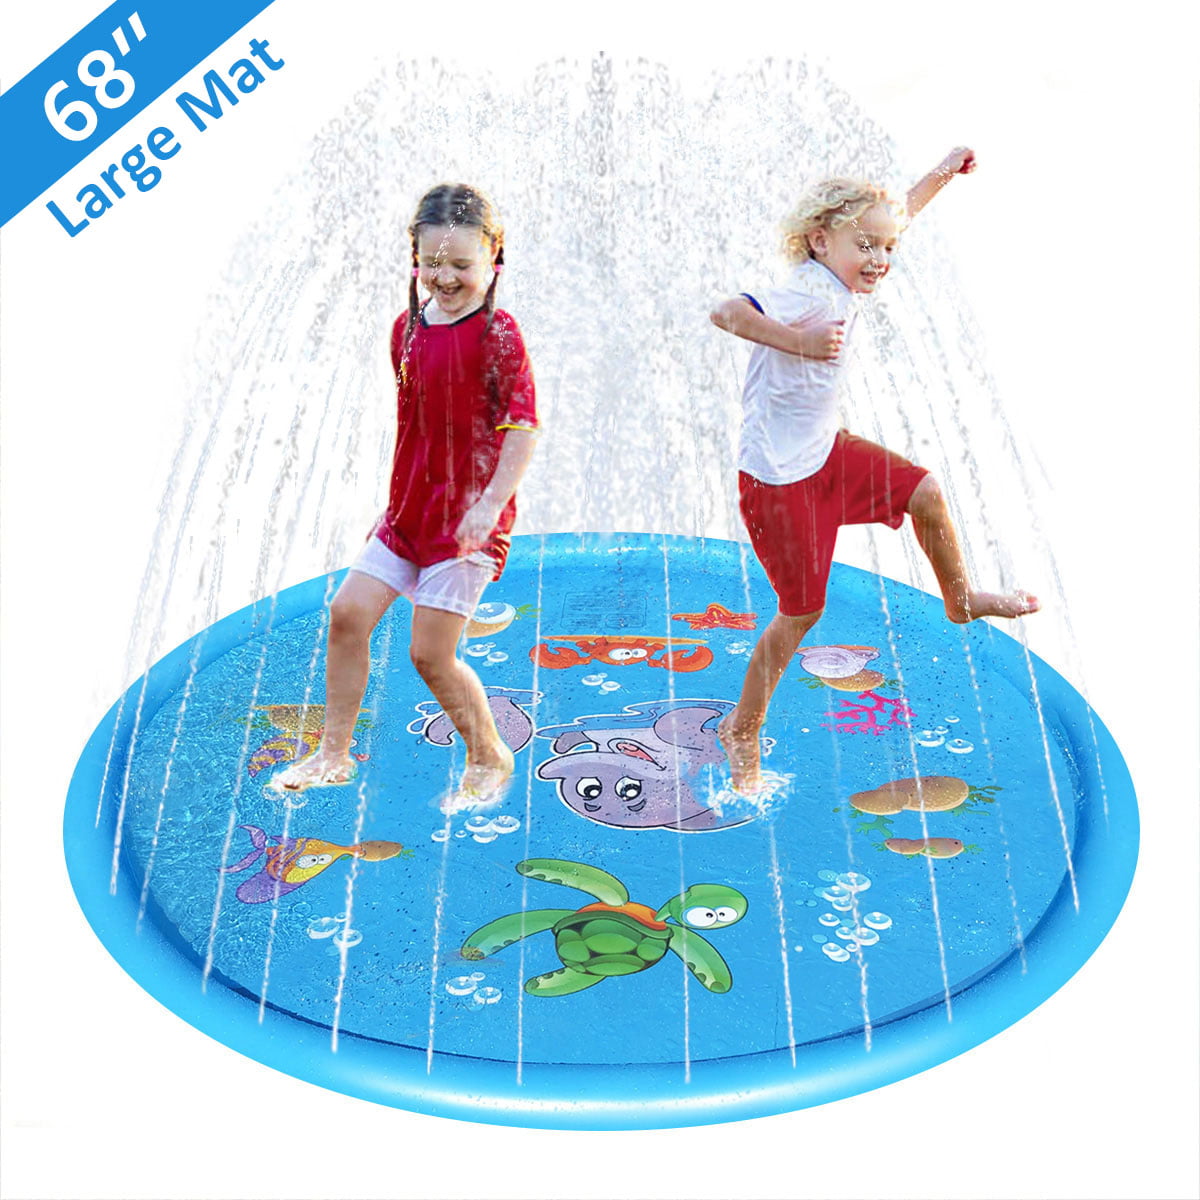 Splash Pad Sprinkler for Kids Water-Filled Play Mat Sprinkler Pool Water Toys with Education Fun for Kids and Family Activities World Map 71in Blue